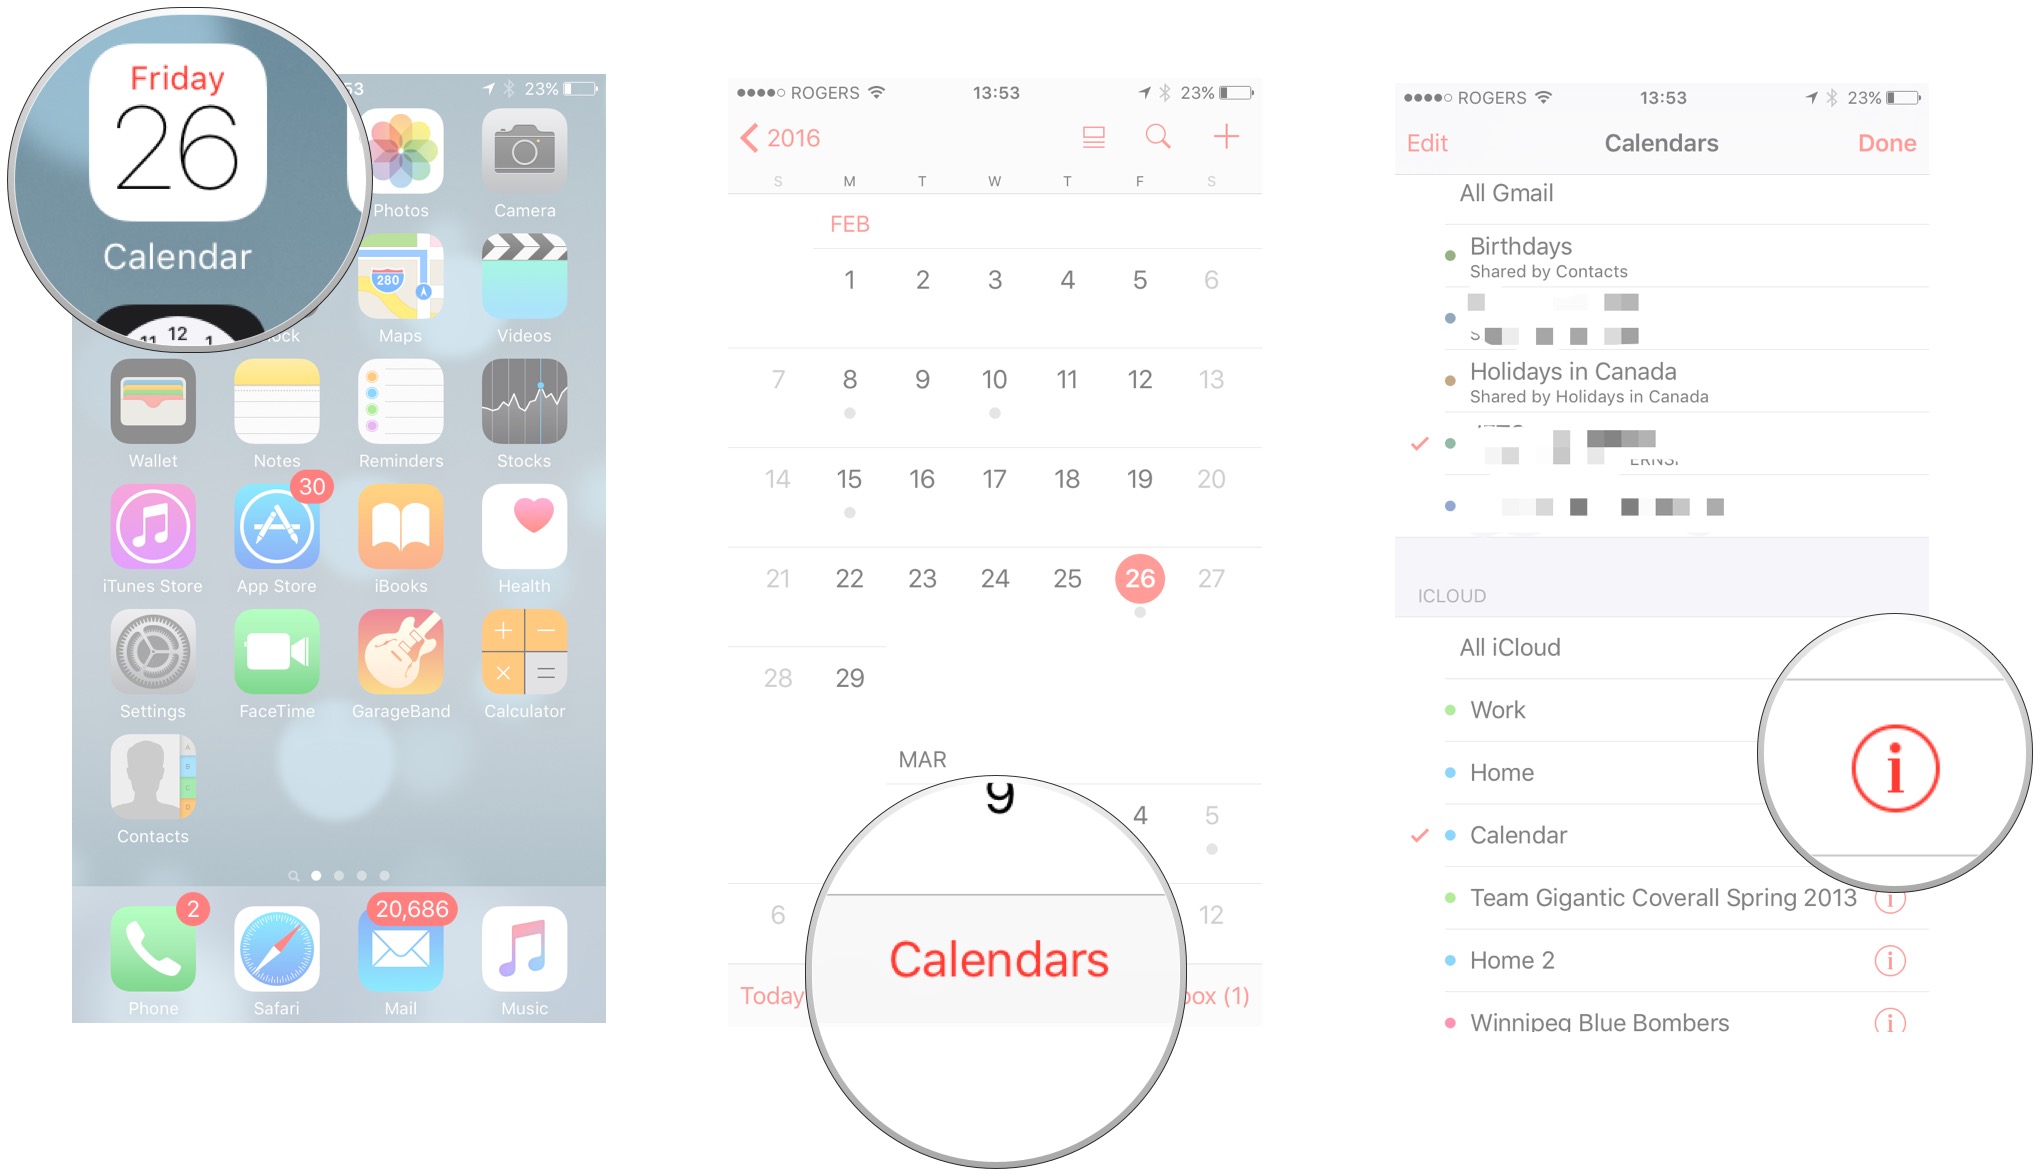 How to share events with Calendar for iPhone and iPad